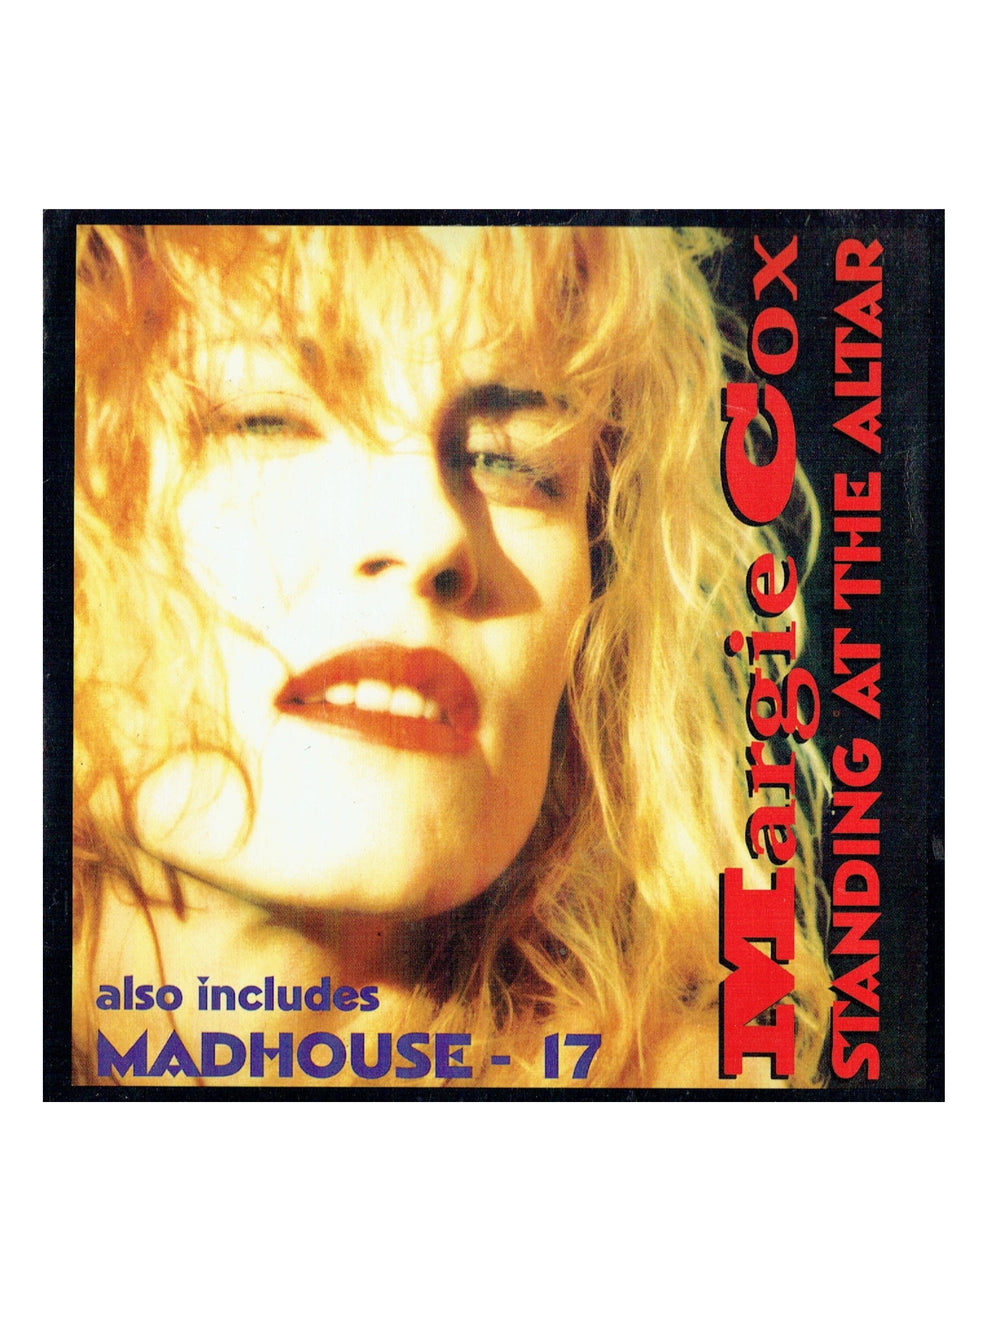 Margie Cox / Madhouse Standing In The Alter / 17 UK / EU 7 Inch Single Prince